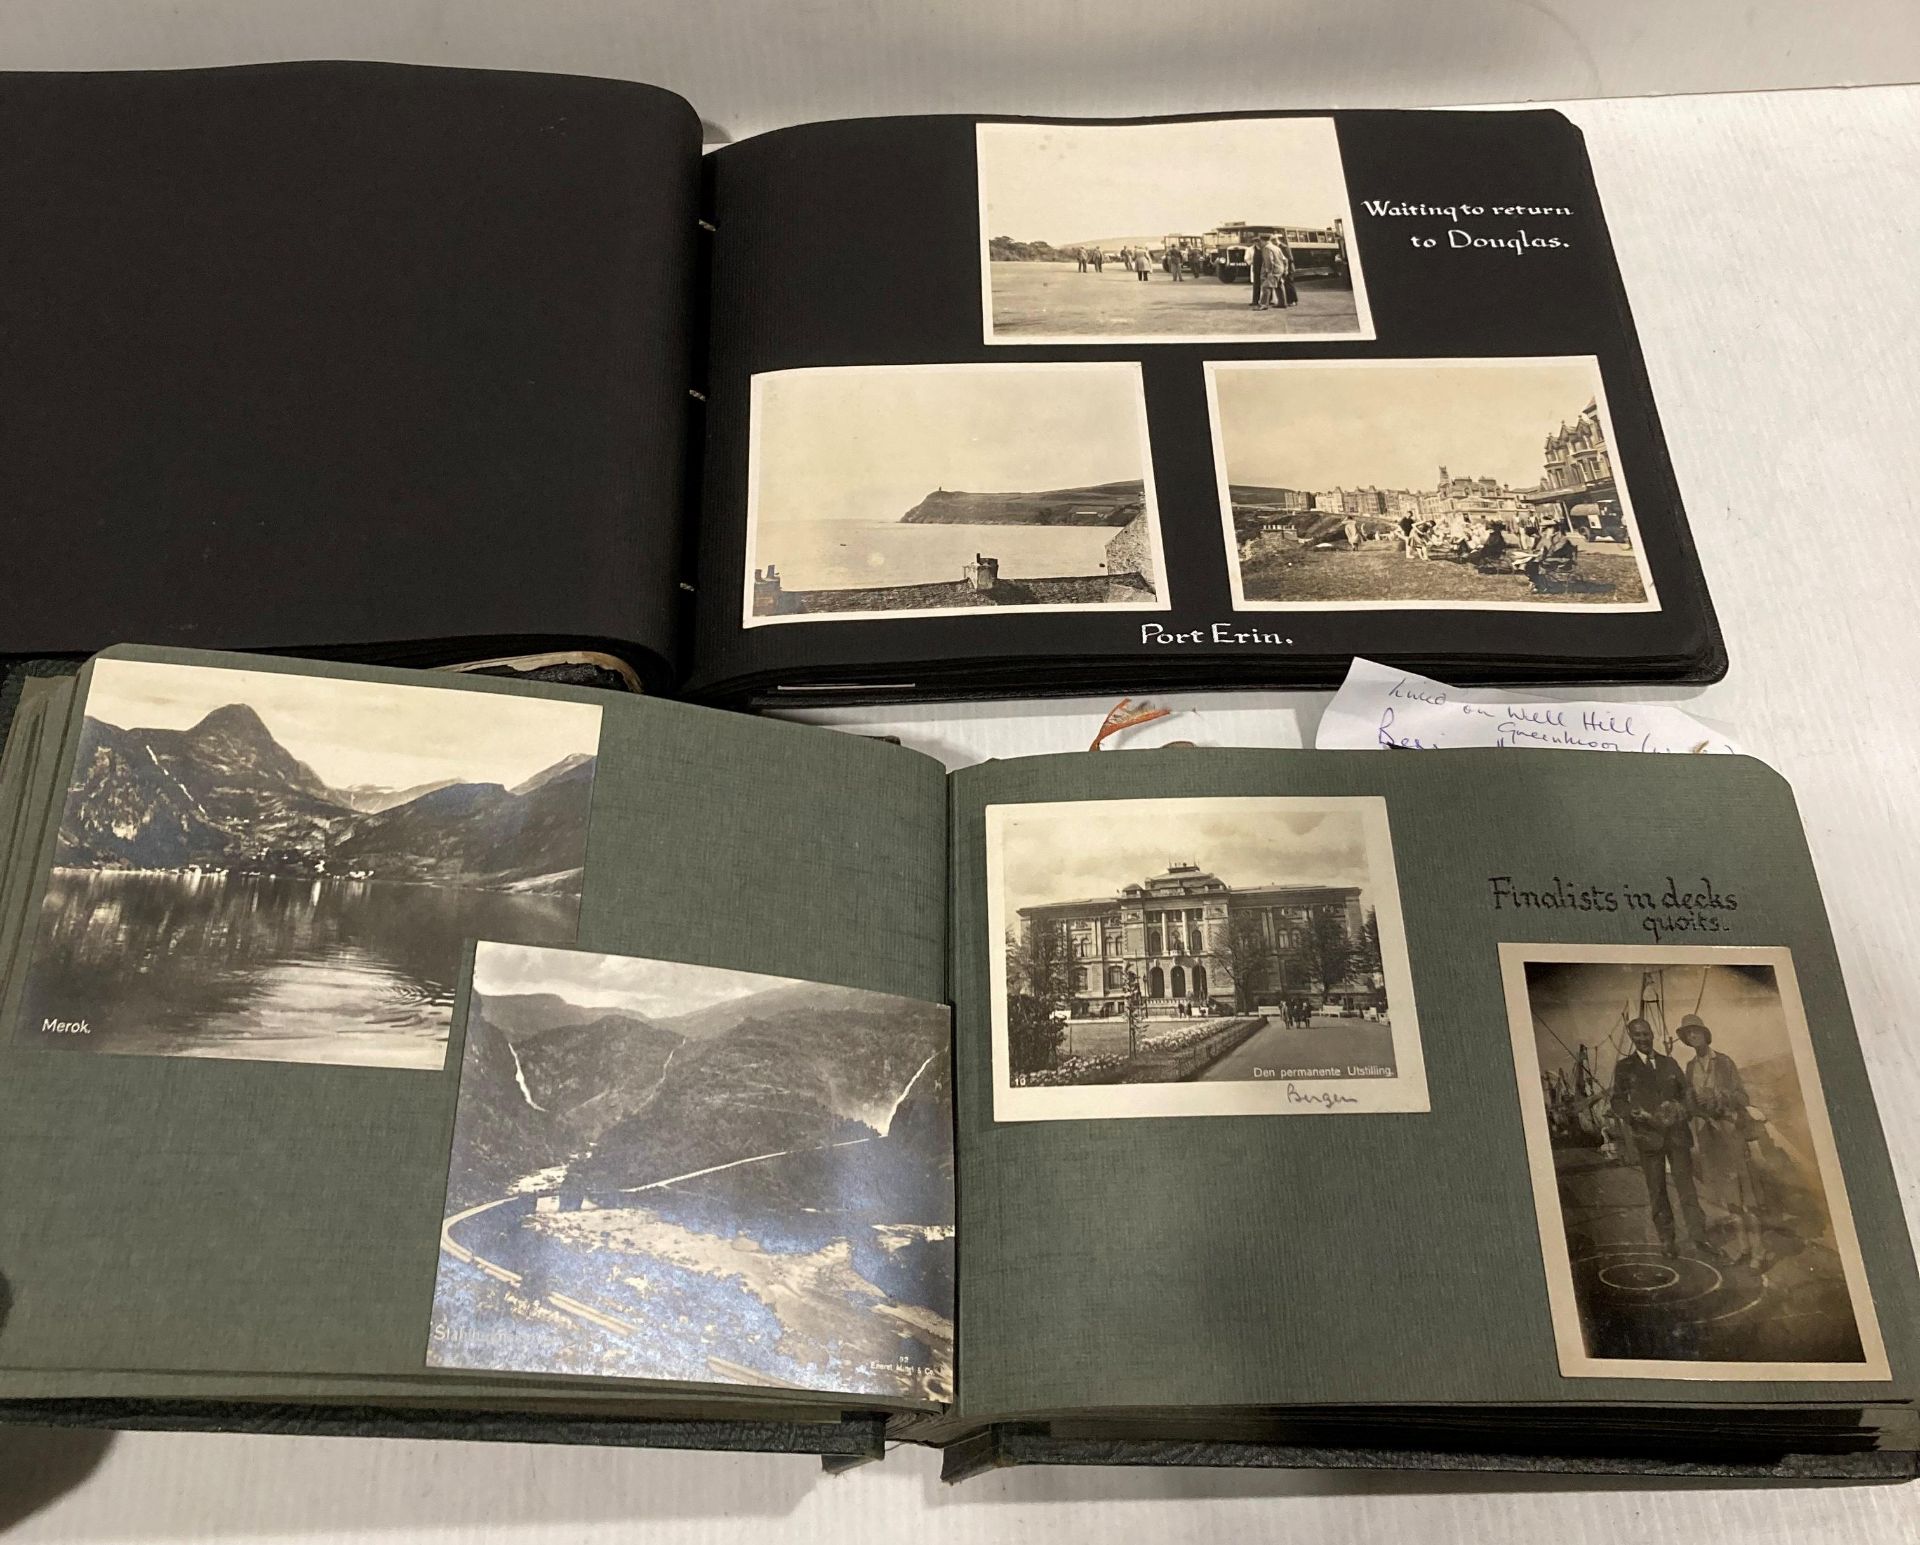 Travelogue of round Britain cruise, Viceroy of India 1930 complete with original photos etc. - Image 3 of 5